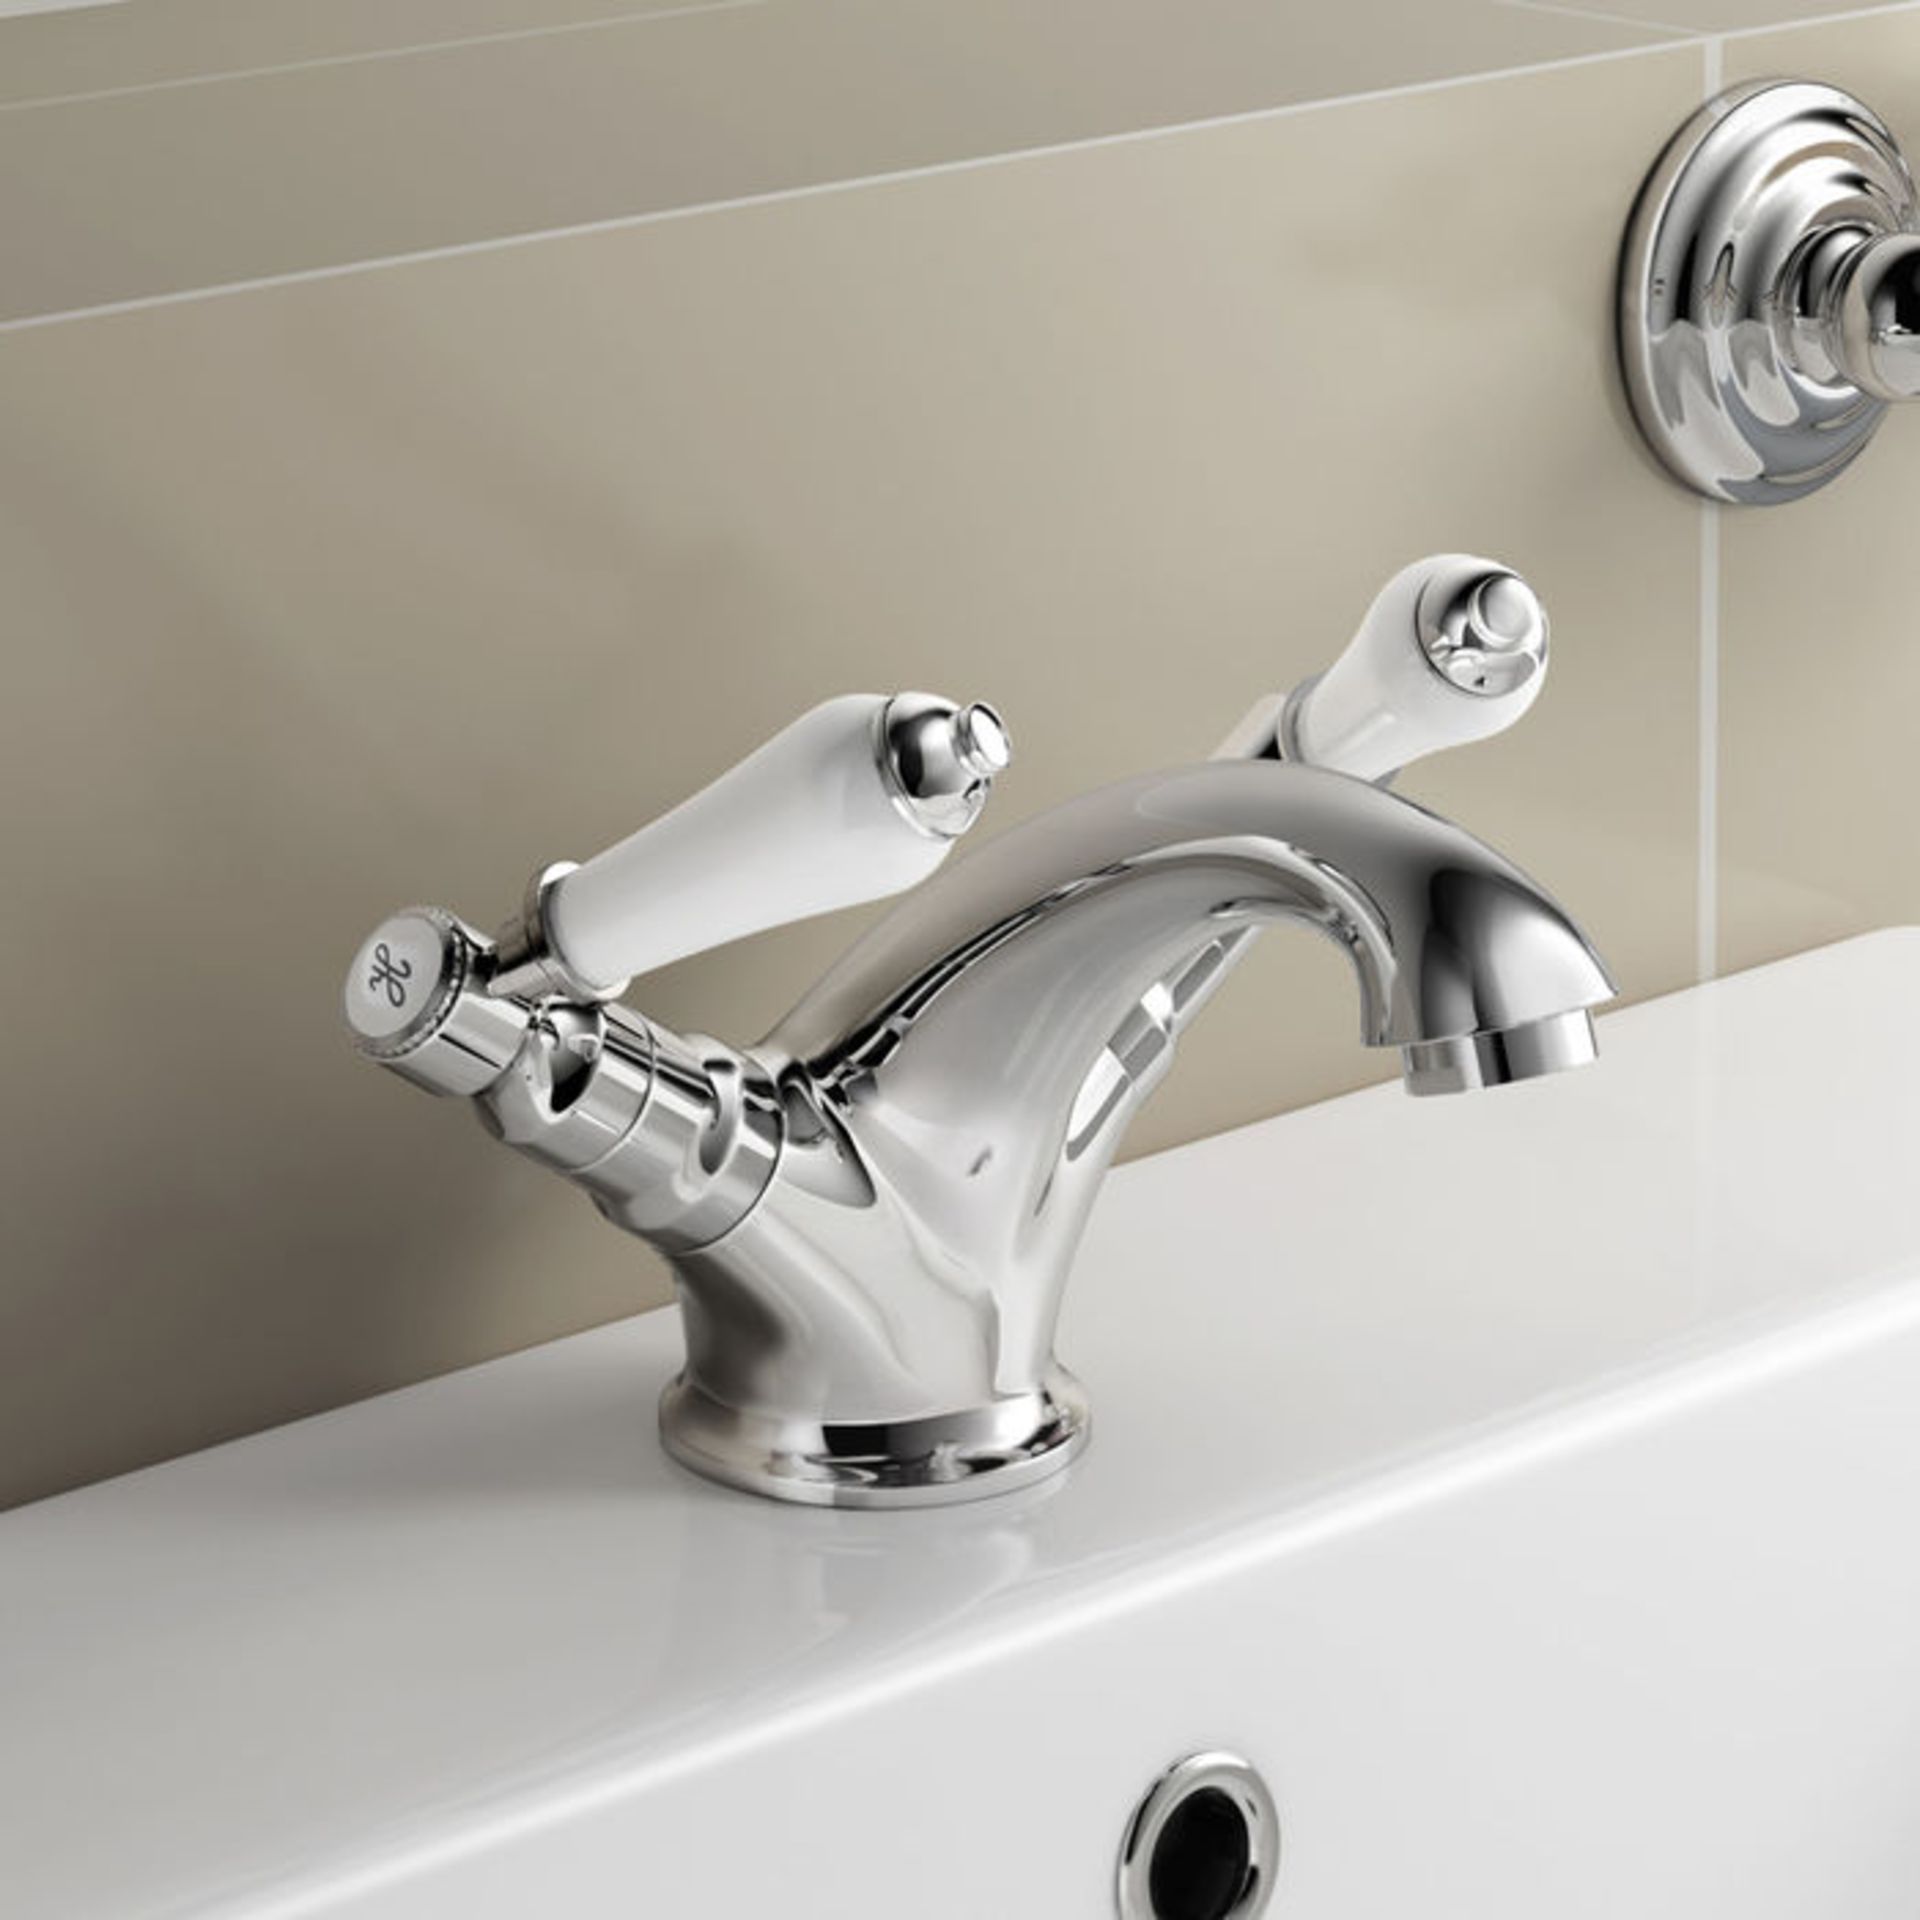 (GR90) Regal Chrome Traditional Basin Sink Lever Mixer Tap. Chrome Plated Solid Brass Mixer - Image 3 of 4